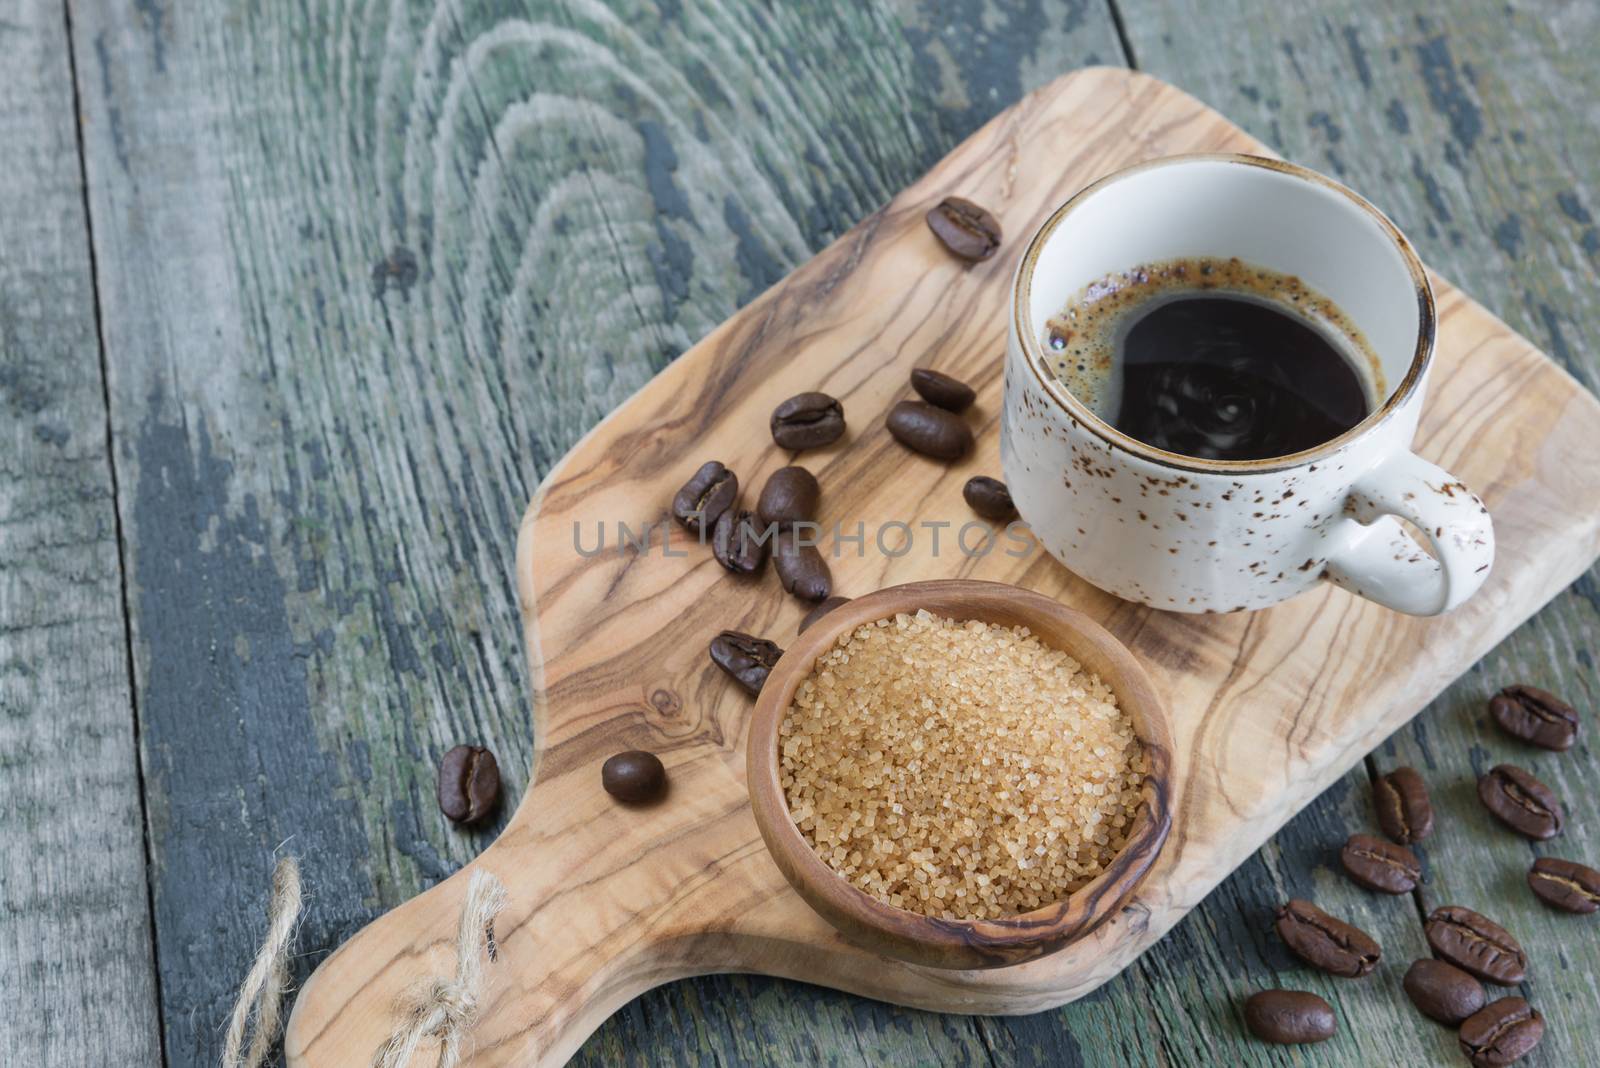 Black coffee in old coffee cup spilled coffee beans and cane sugar in a wooden bowl on the old wooden table